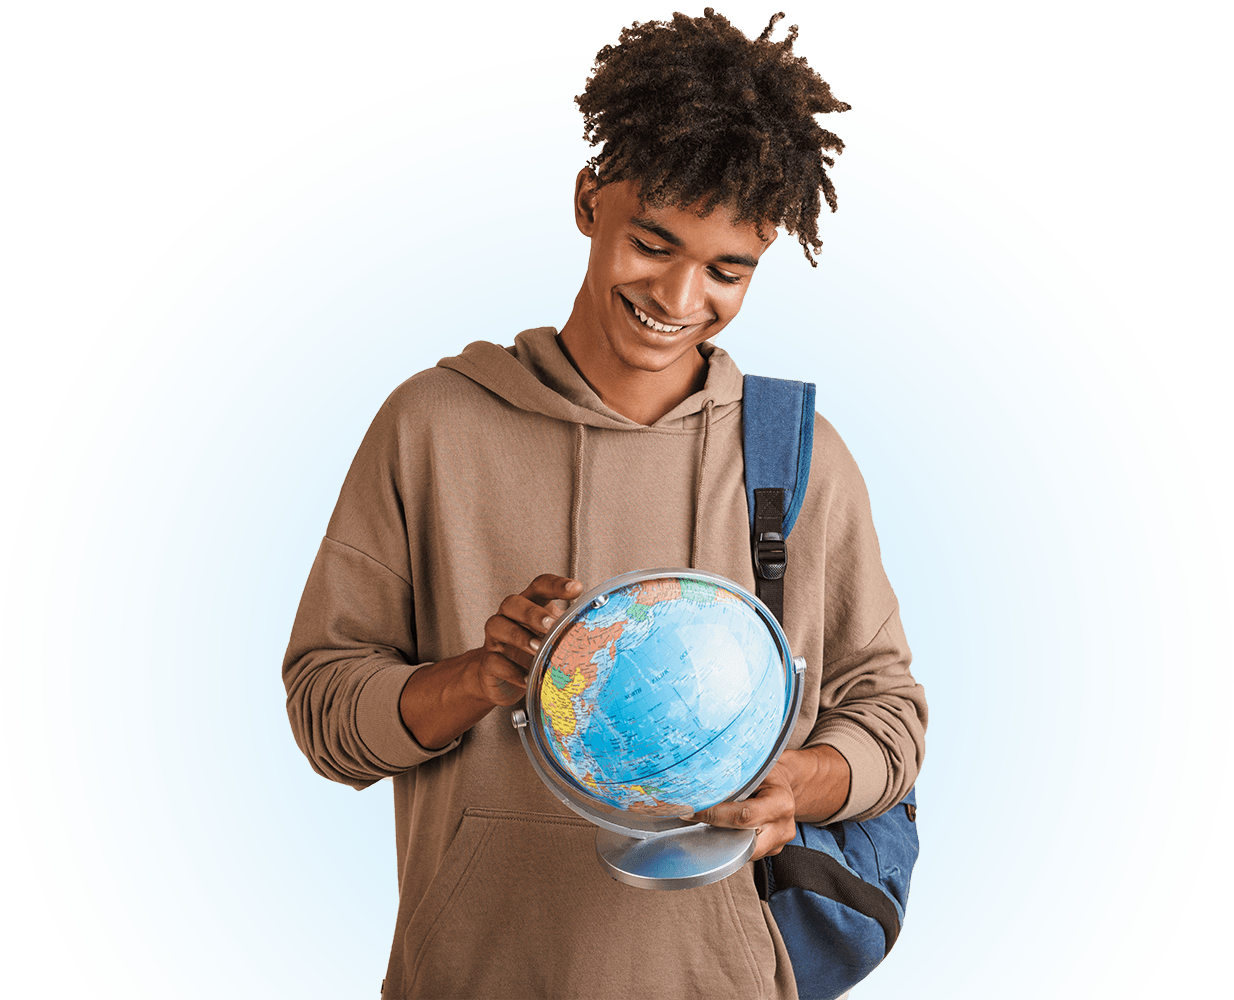 Student with a globe in his hand